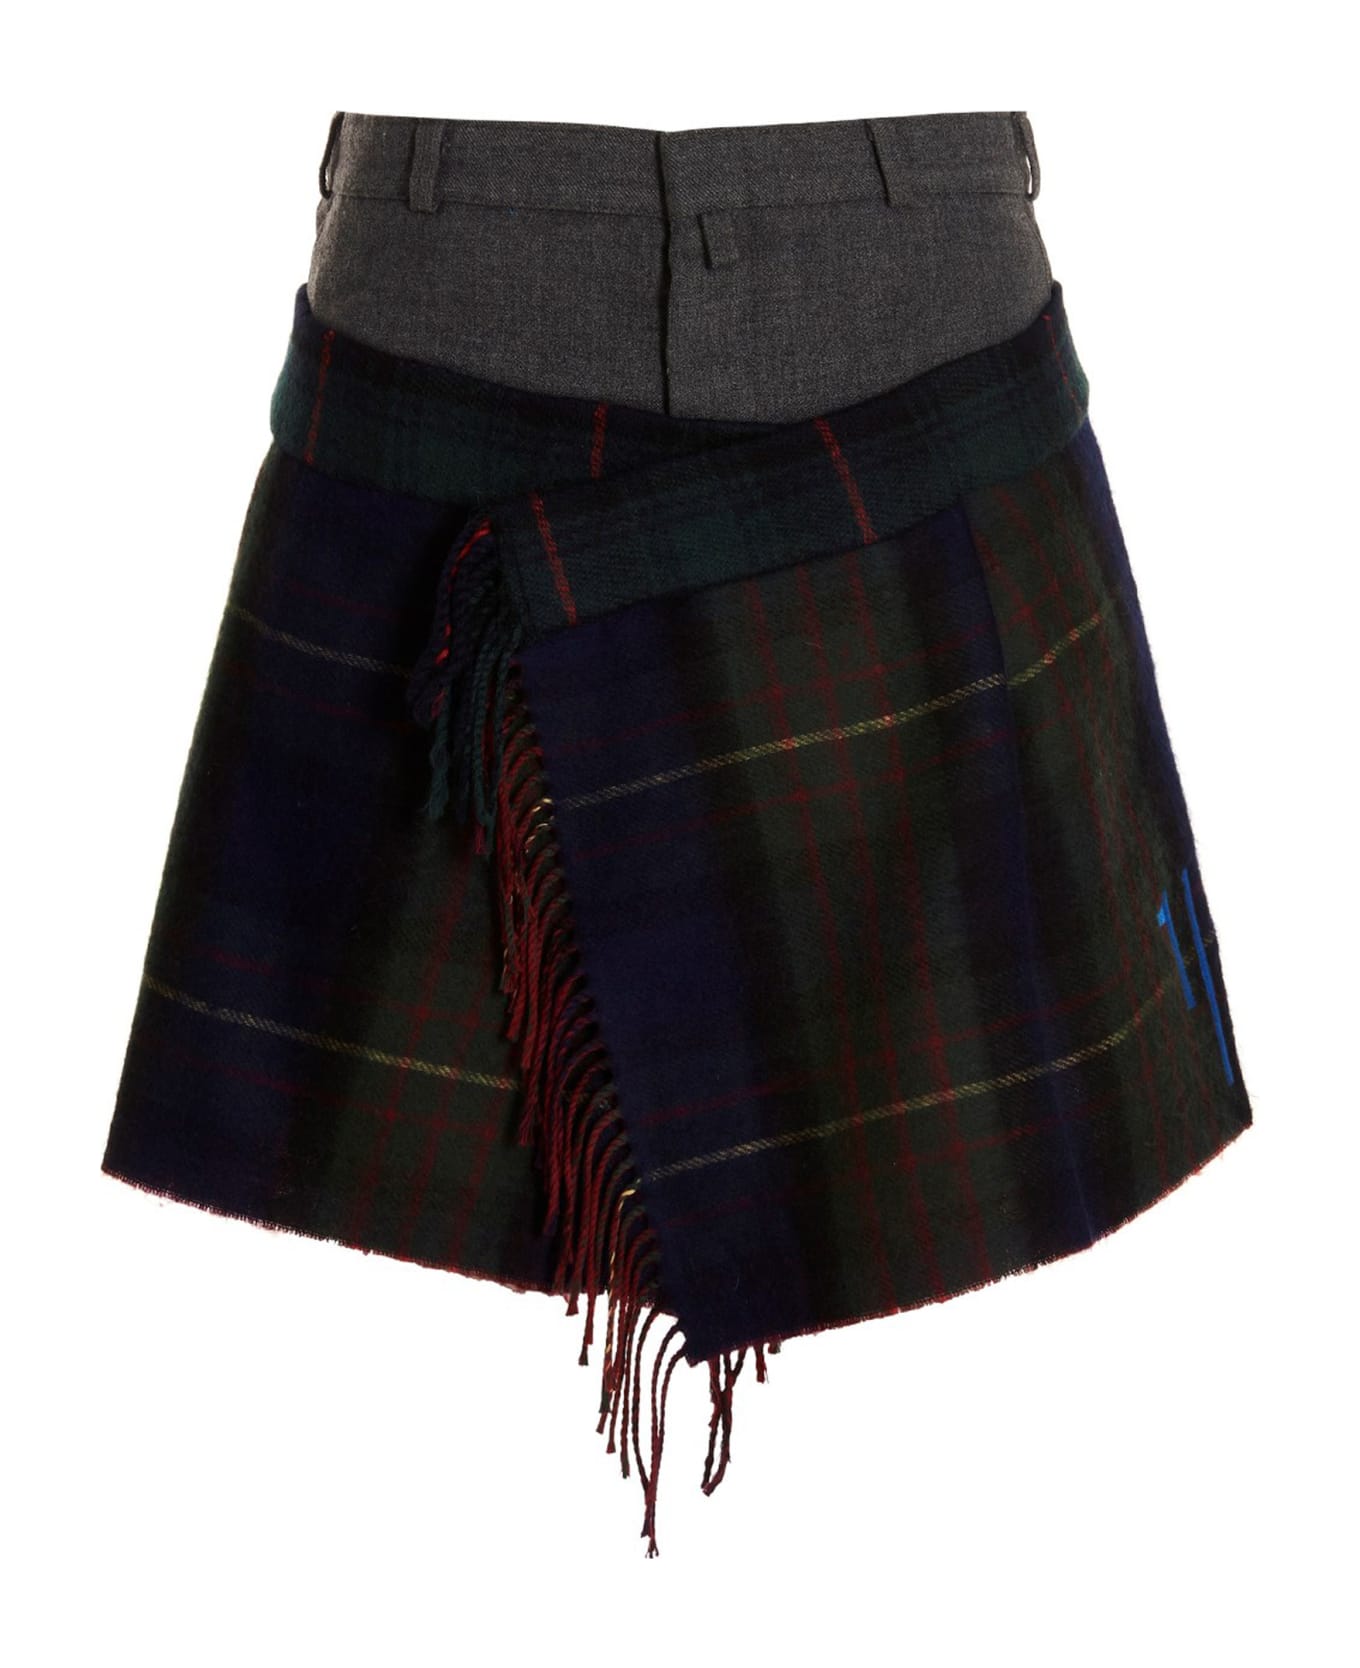 1/OFF 'check Scarf Reworked' Skirt - Multicolor